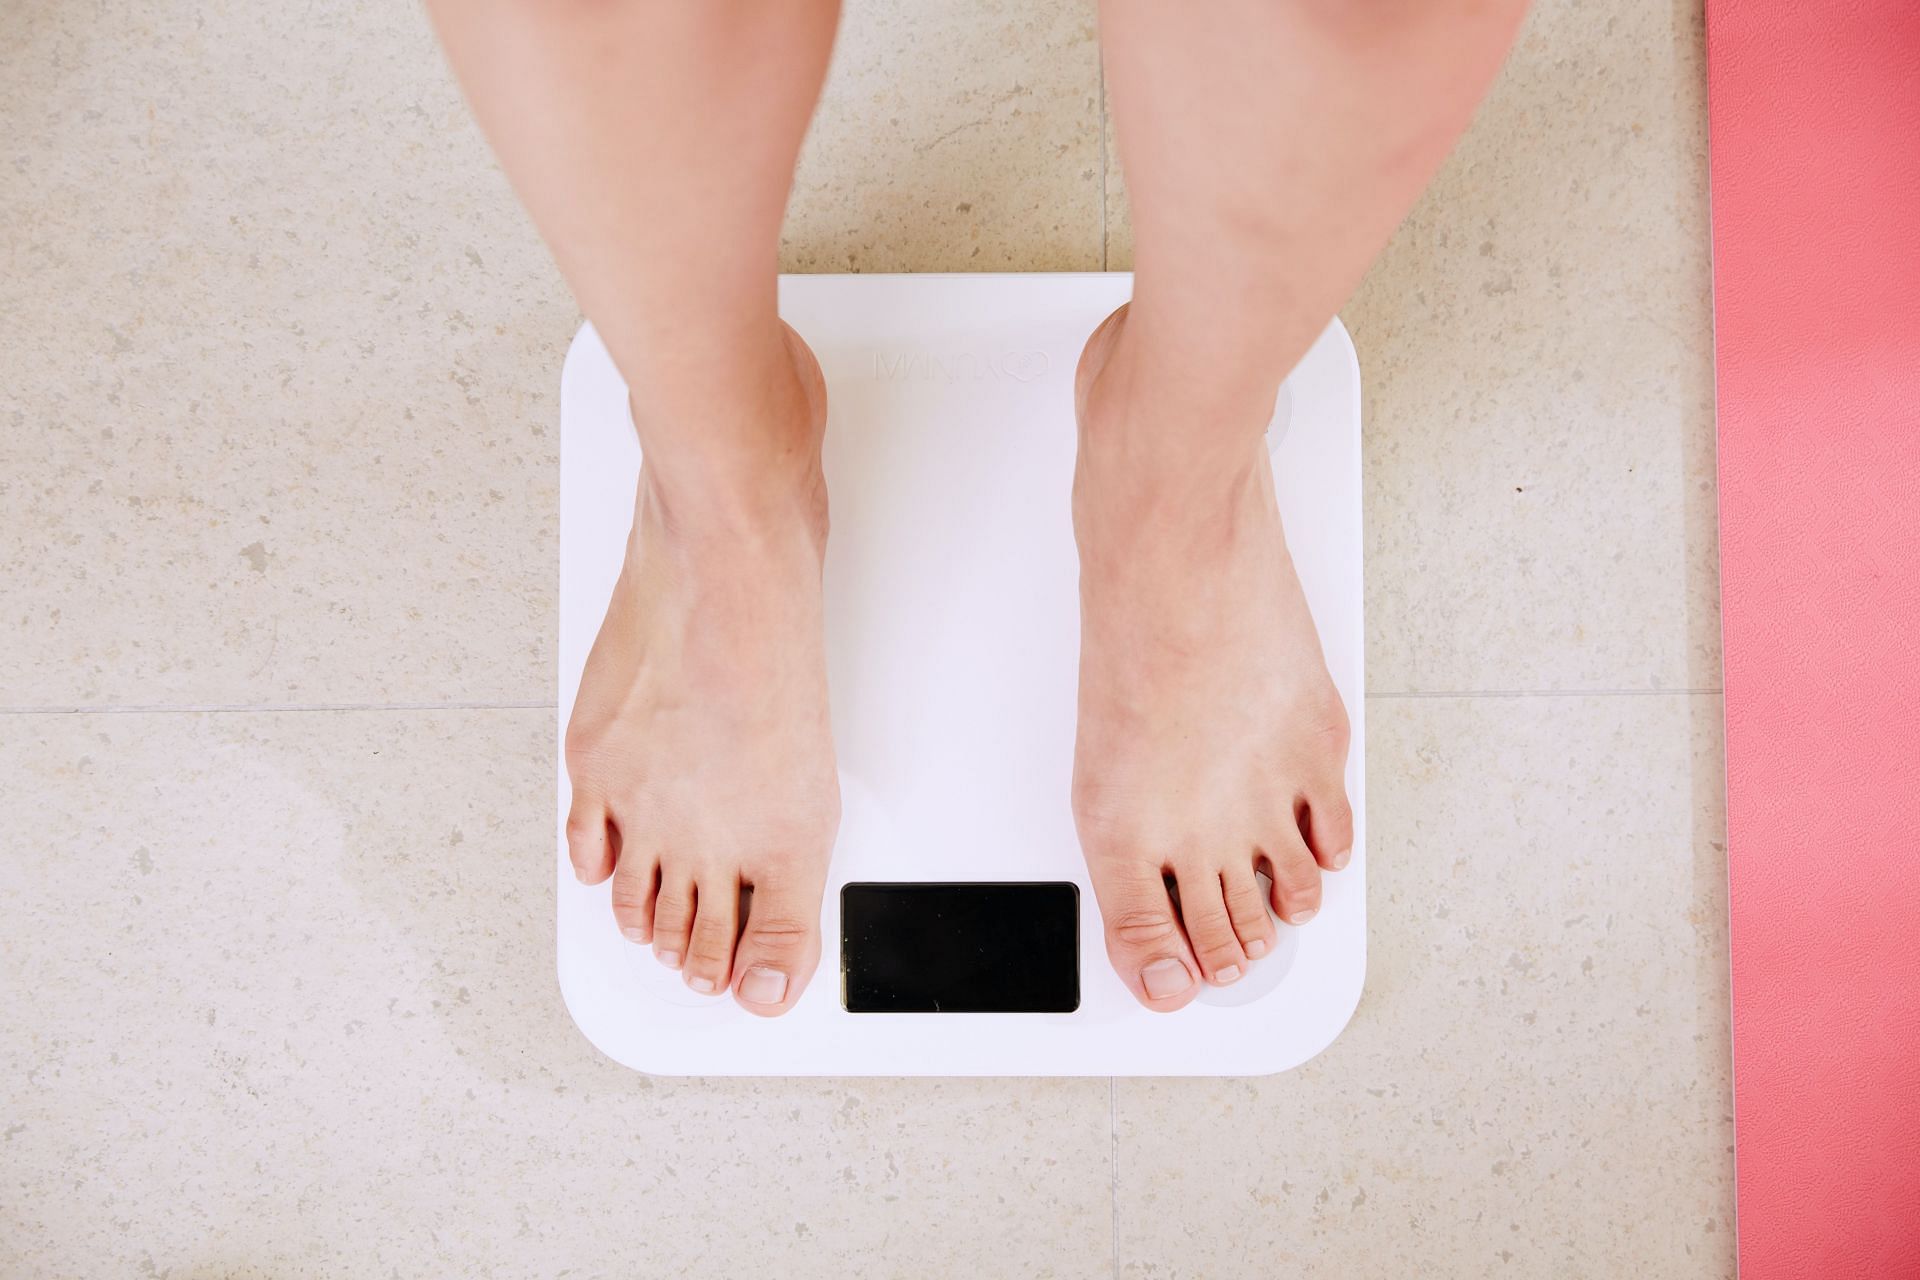 Suddent Weight Loss Can Lead to Muscle Loss (Image via Unsplash/i yunmai)